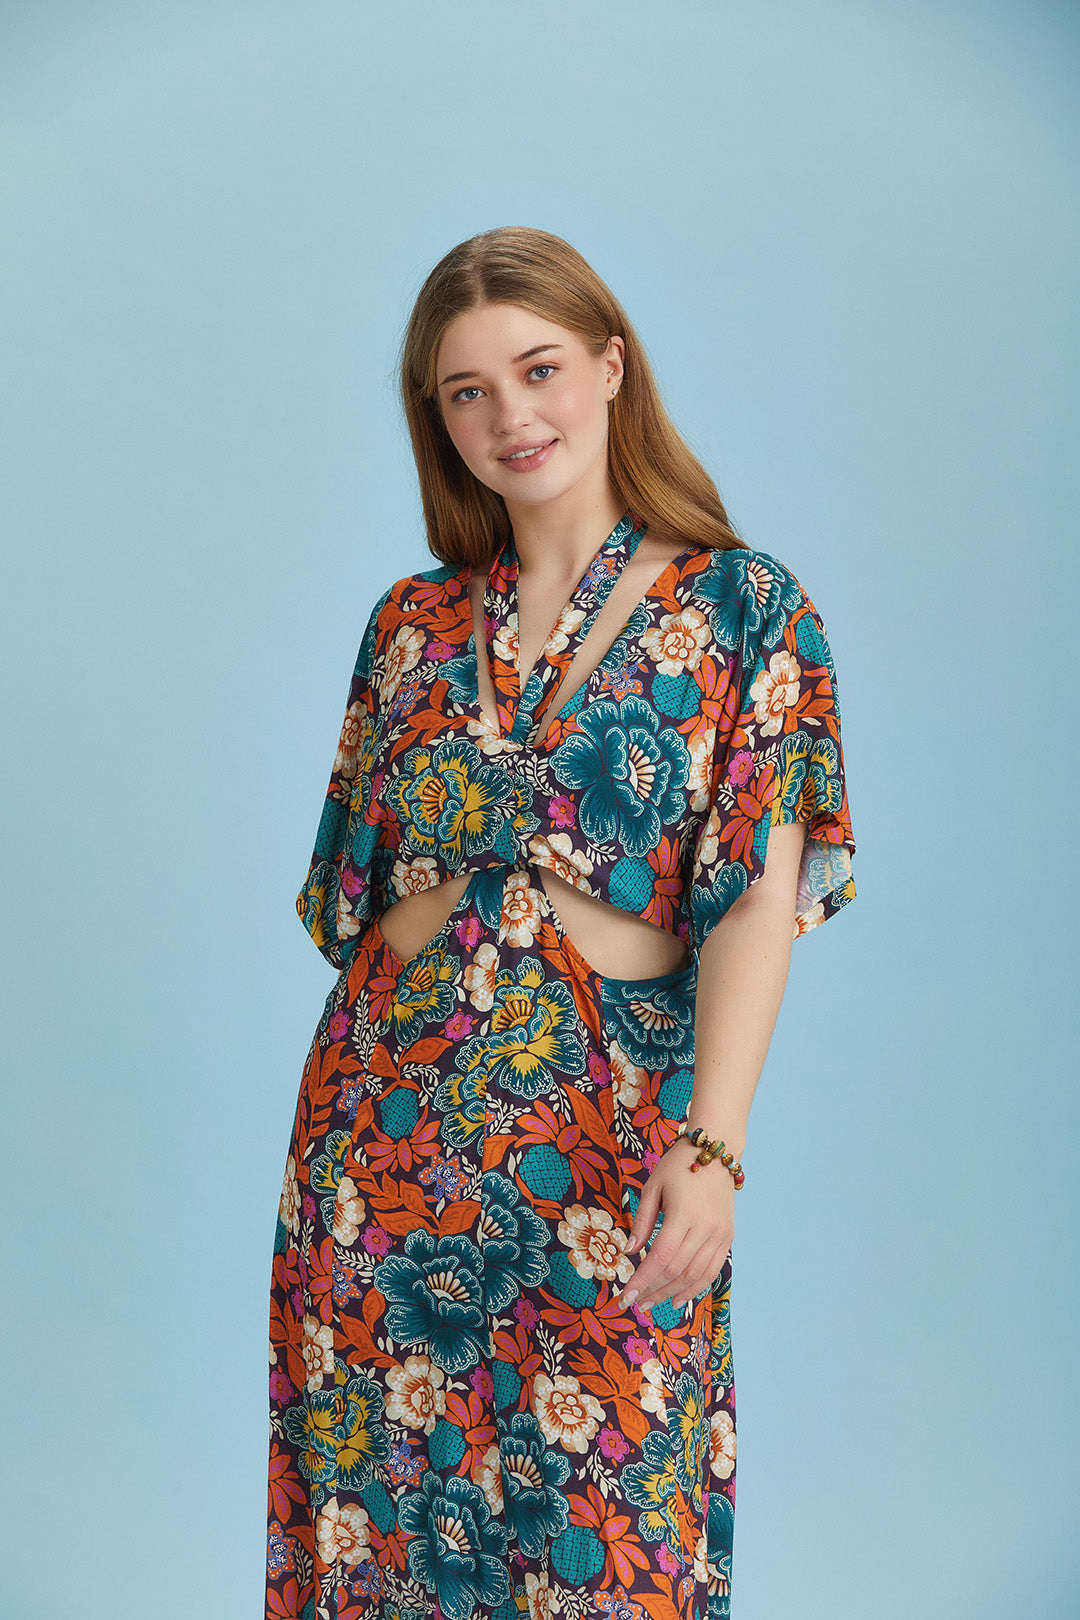 Boho Chic Style Floral Printed Cut Out Plus Size Dress